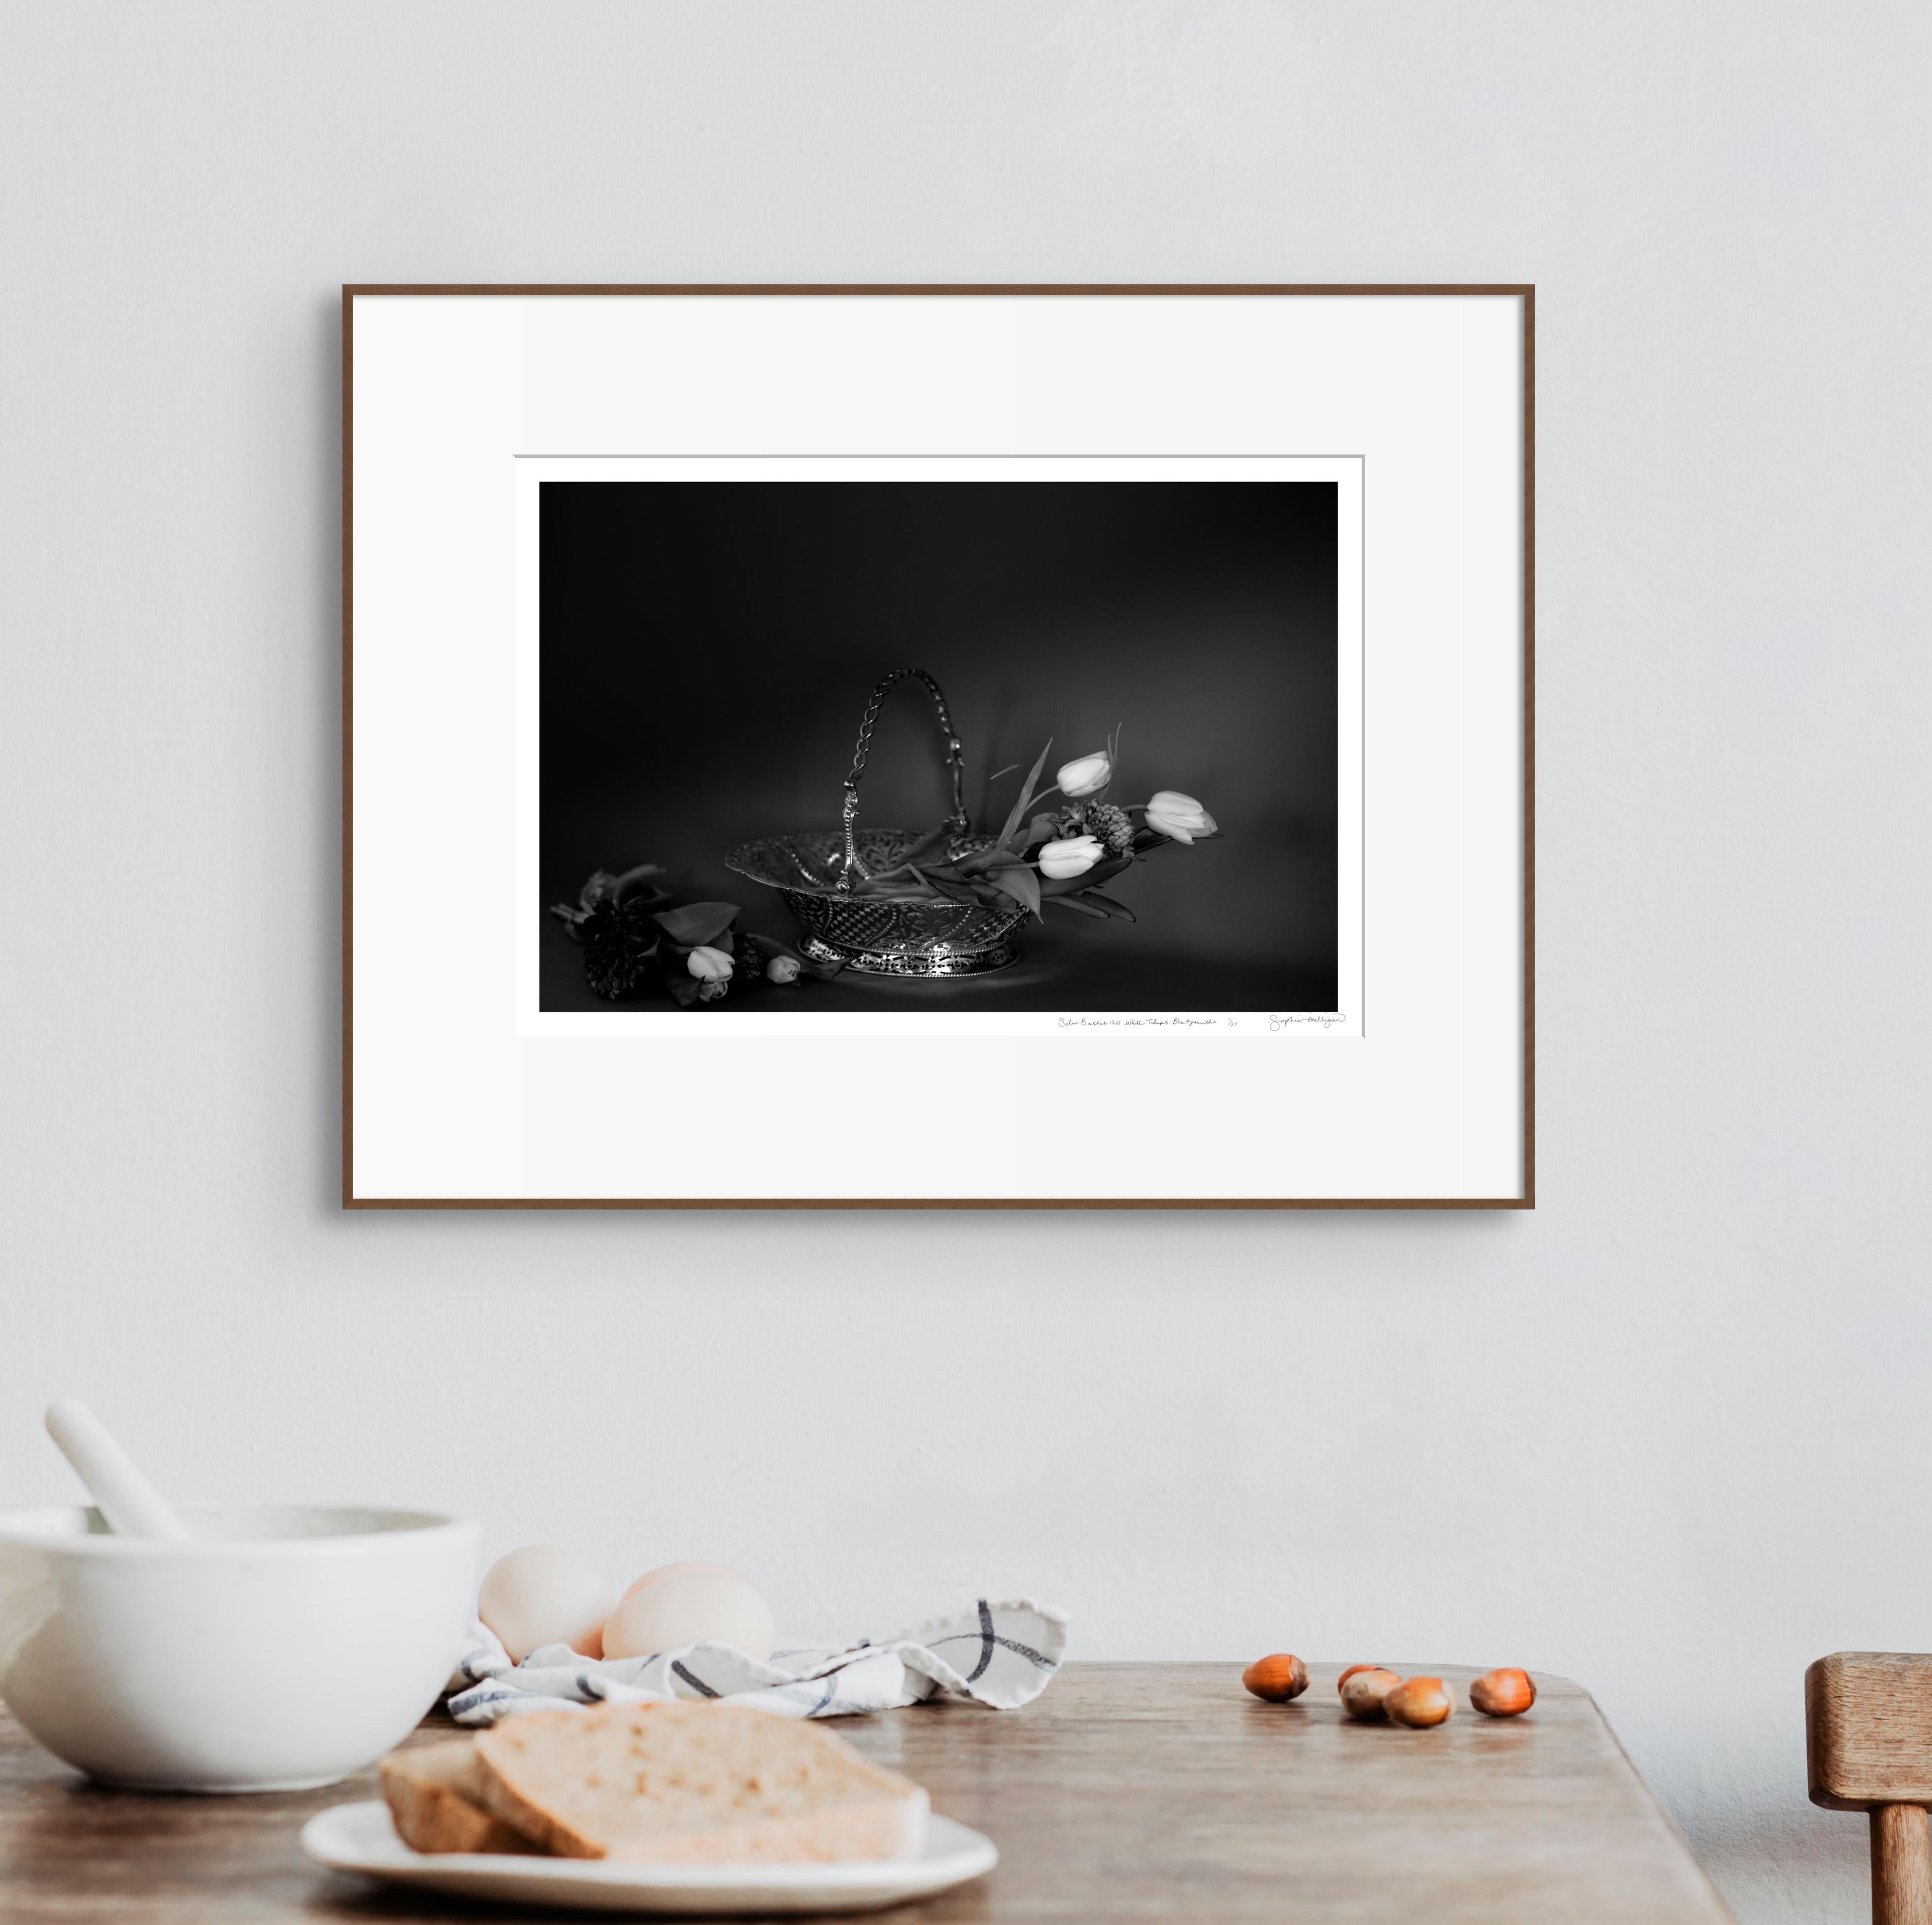 'Silver basket 1761, White Tulips, Blue Hyacinths'
Limited edition (1 of 25) archival black and white photograph. Unframed.
_________________
Sophia's poetic photographs are an exploration of the balance in all things: in the sensual interplay of